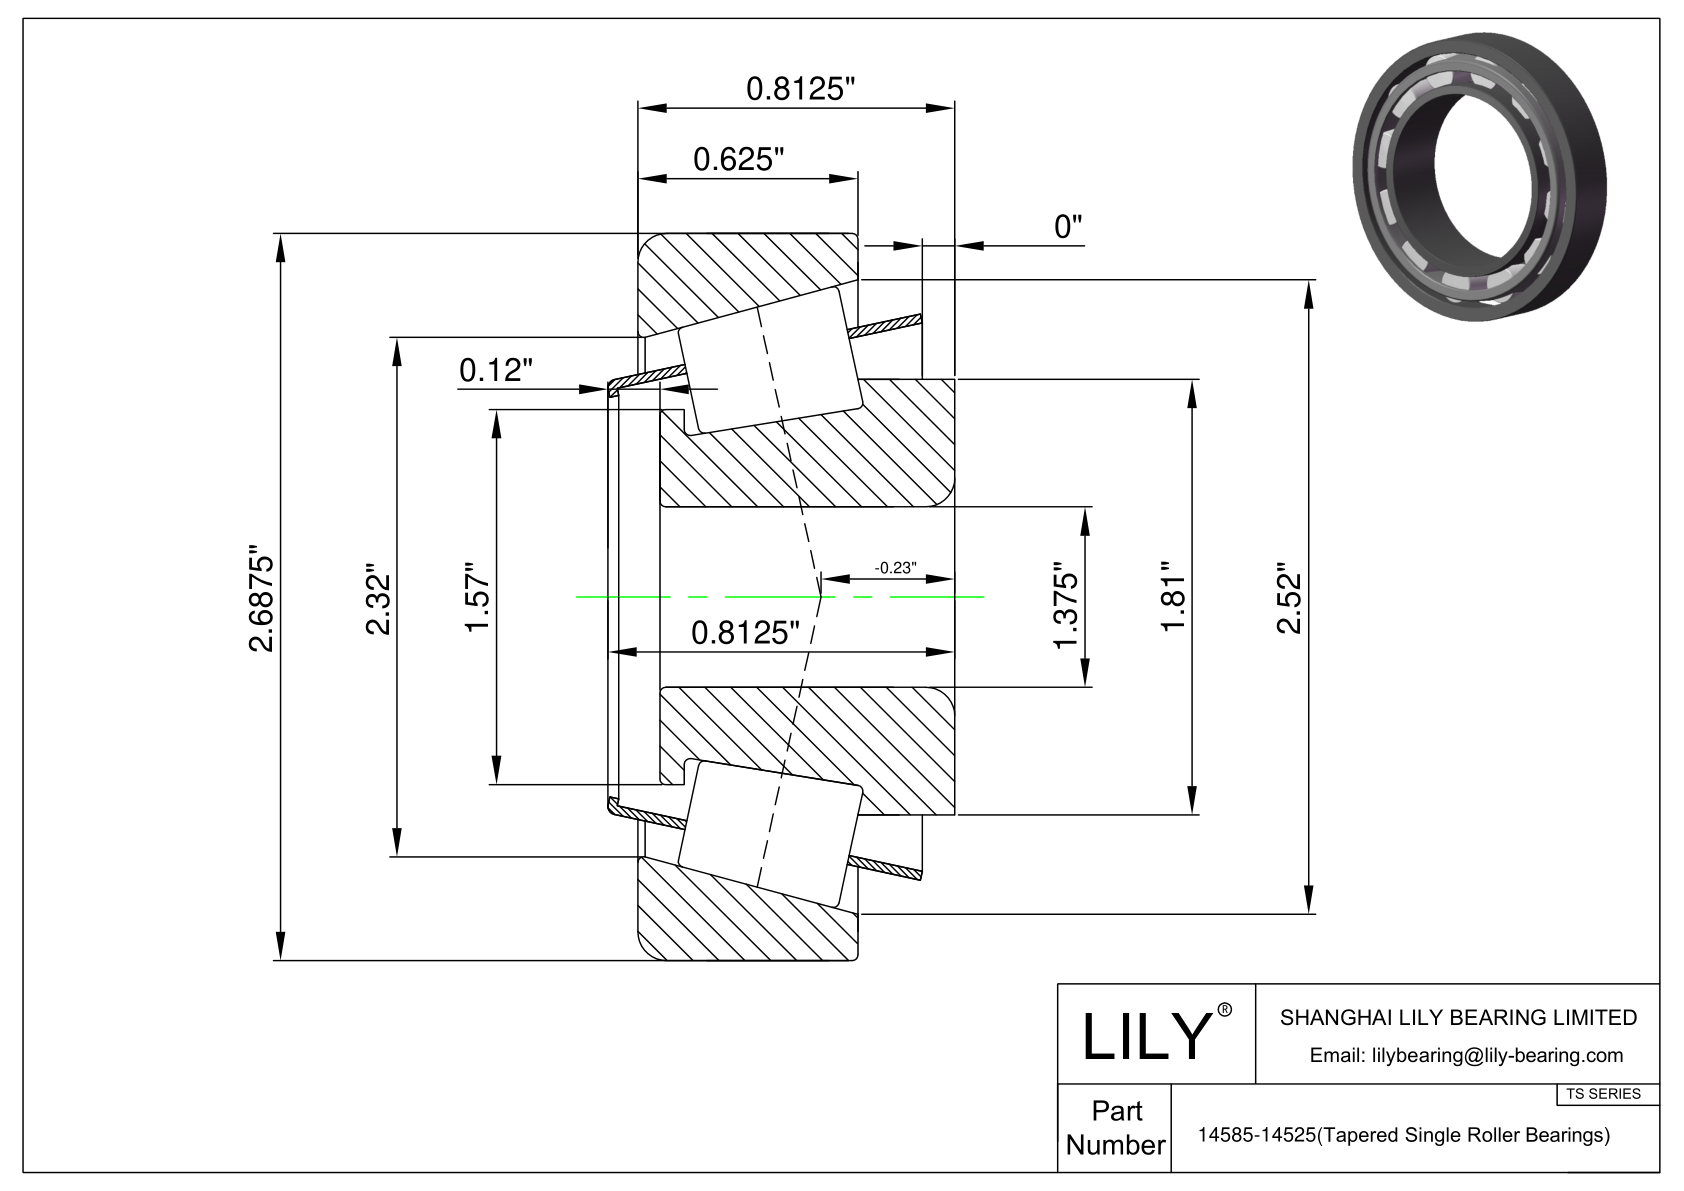 14585-14525 TS (Tapered Single Roller Bearings) (Imperial) cad drawing